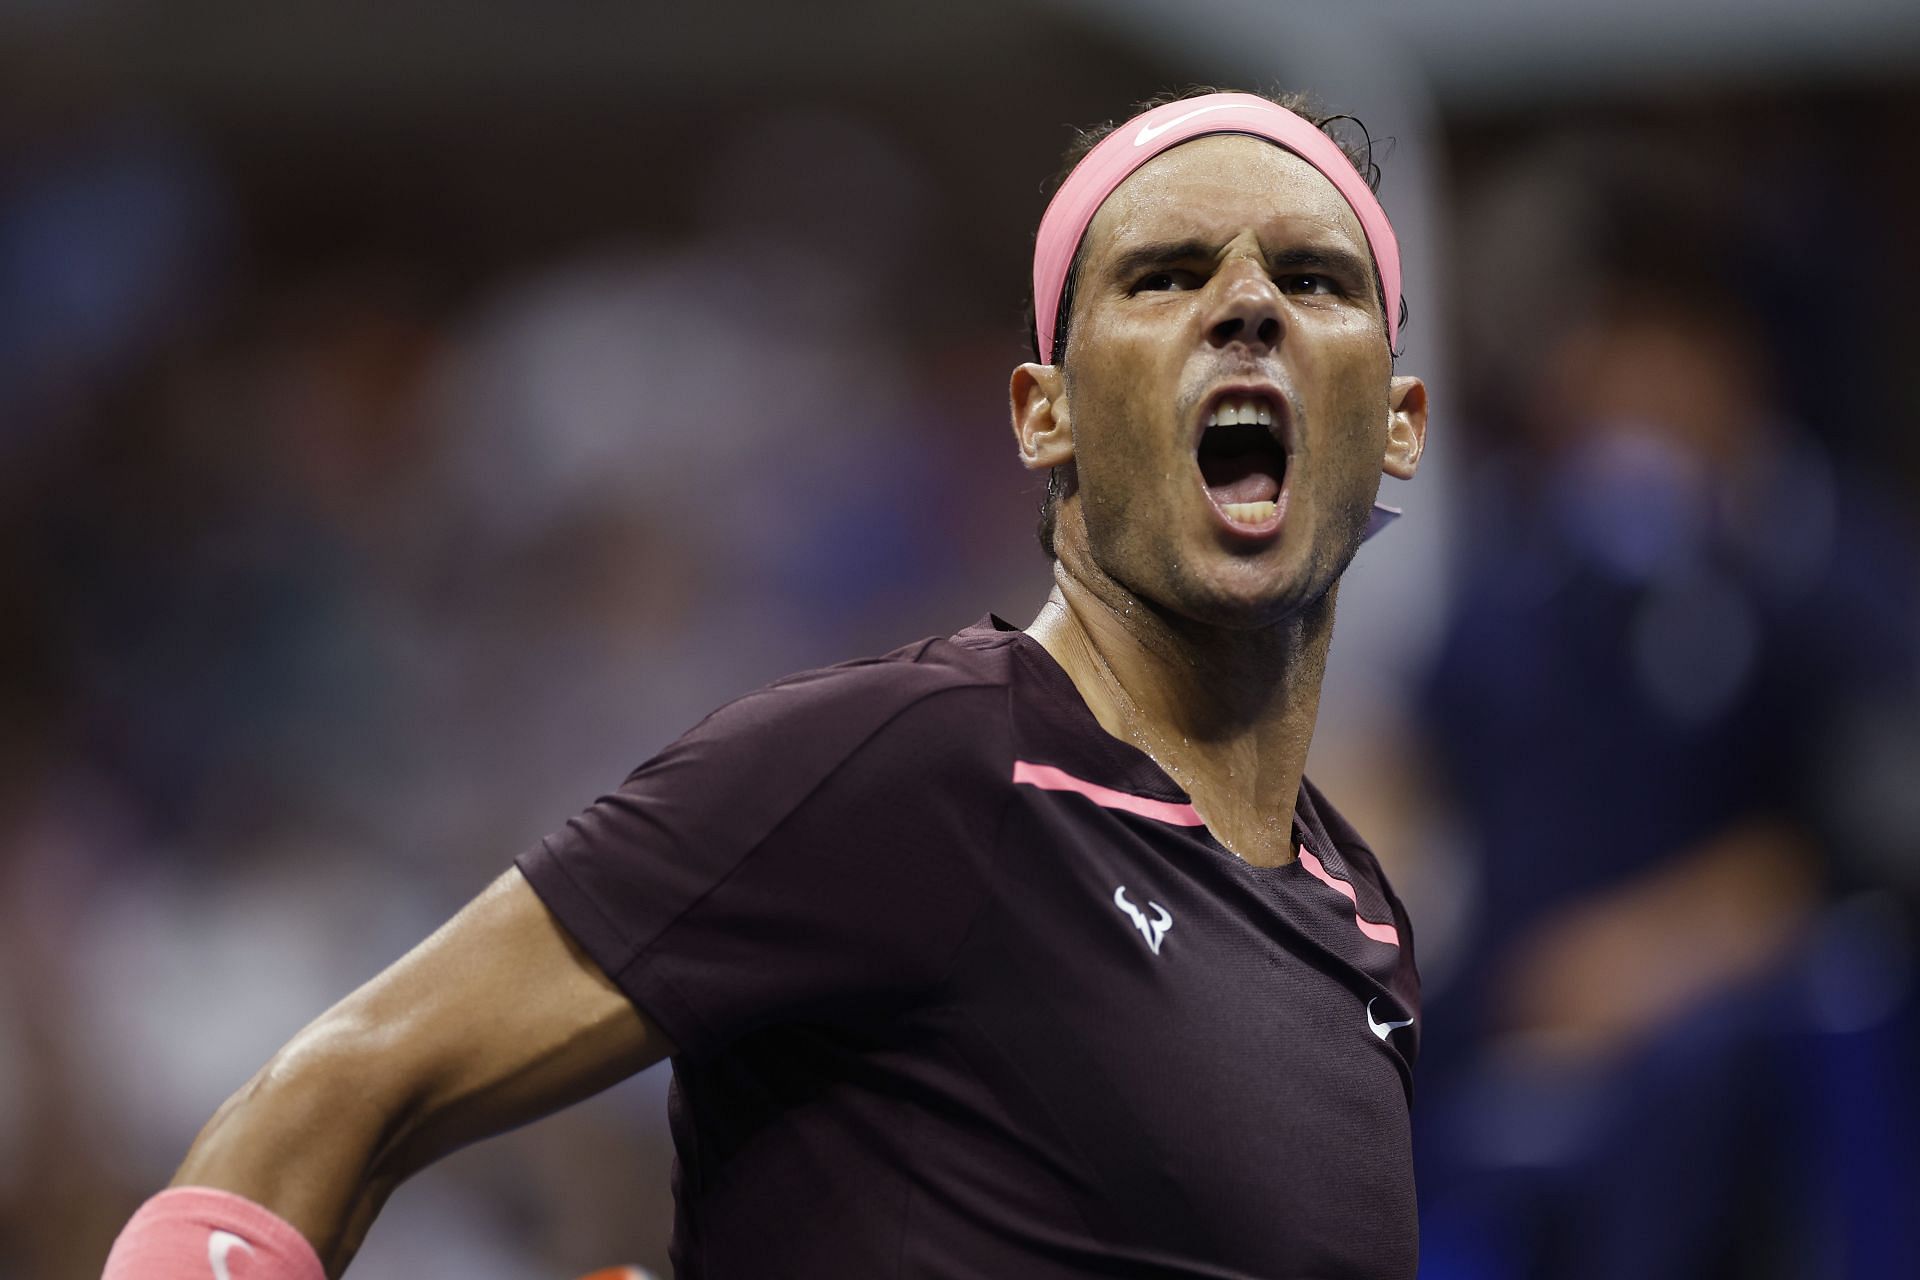 Rafael Nadal's next match Opponent, venue, live streaming, TV channel